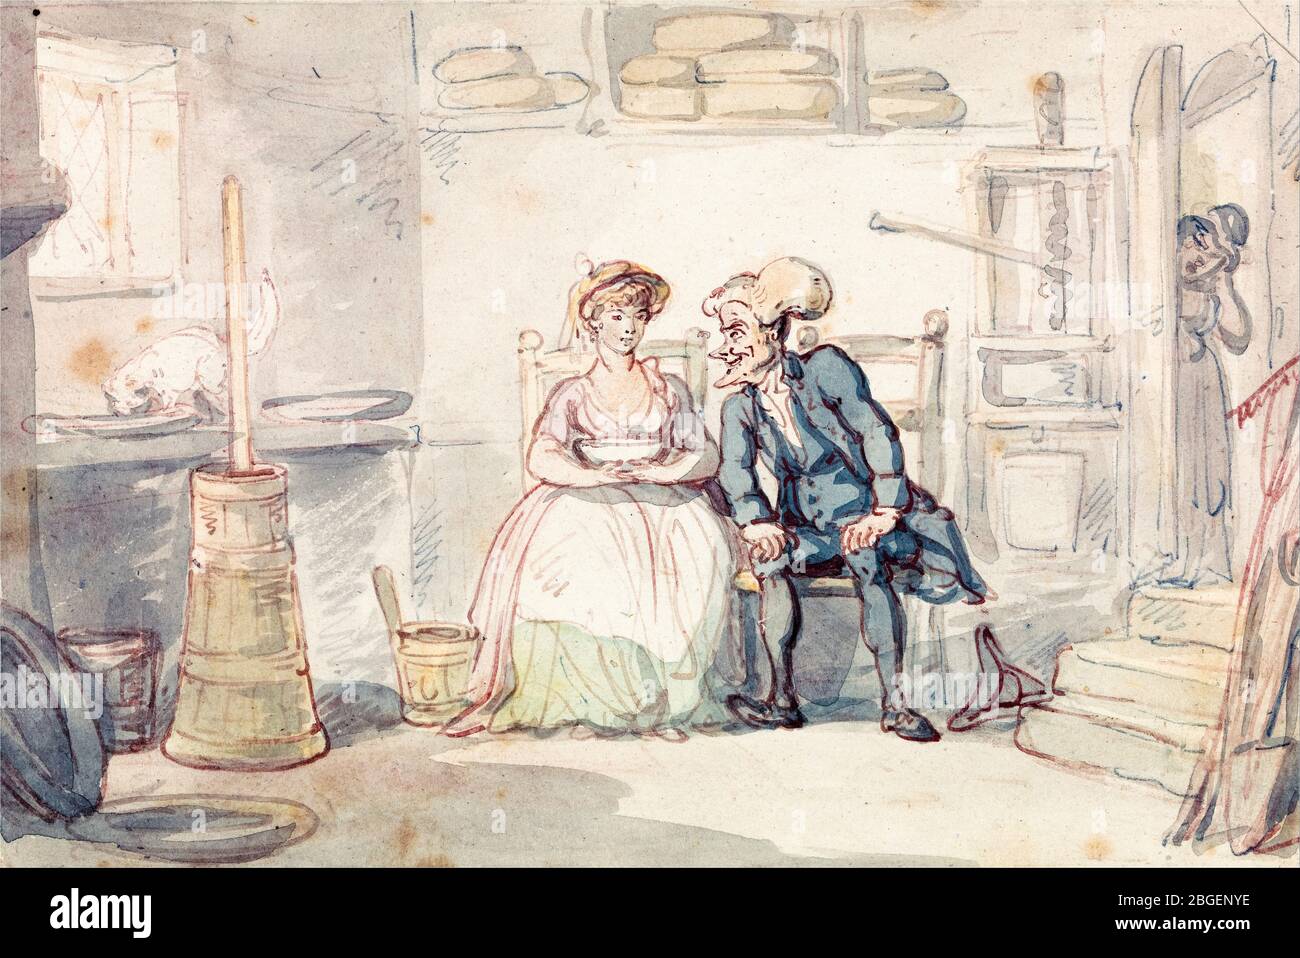 Thomas Rowlandson, Dr Syntax and Dairymaid, (Milkmaid), drawing, drawings, 1821 Stock Photo